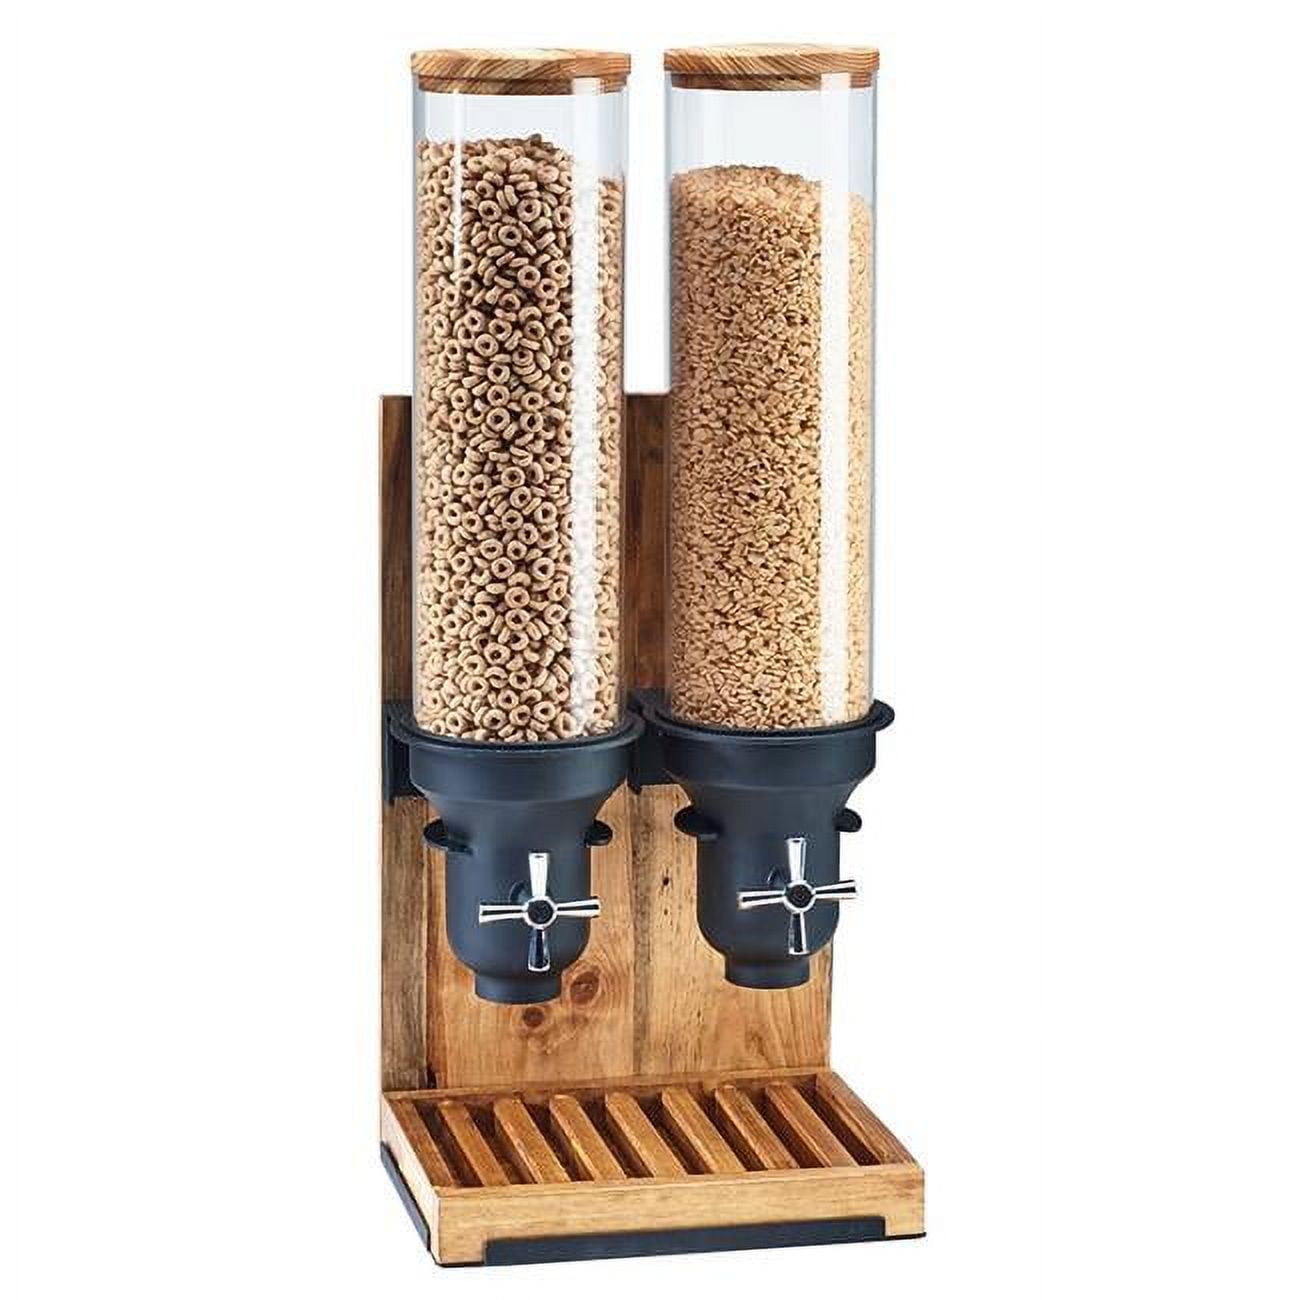 Picture of Cal Mil 3584-2-99 4.5 ltr Madera Cereal Dispenser with 2 Cylinders - 11 x 8.75 x 26.5 in.